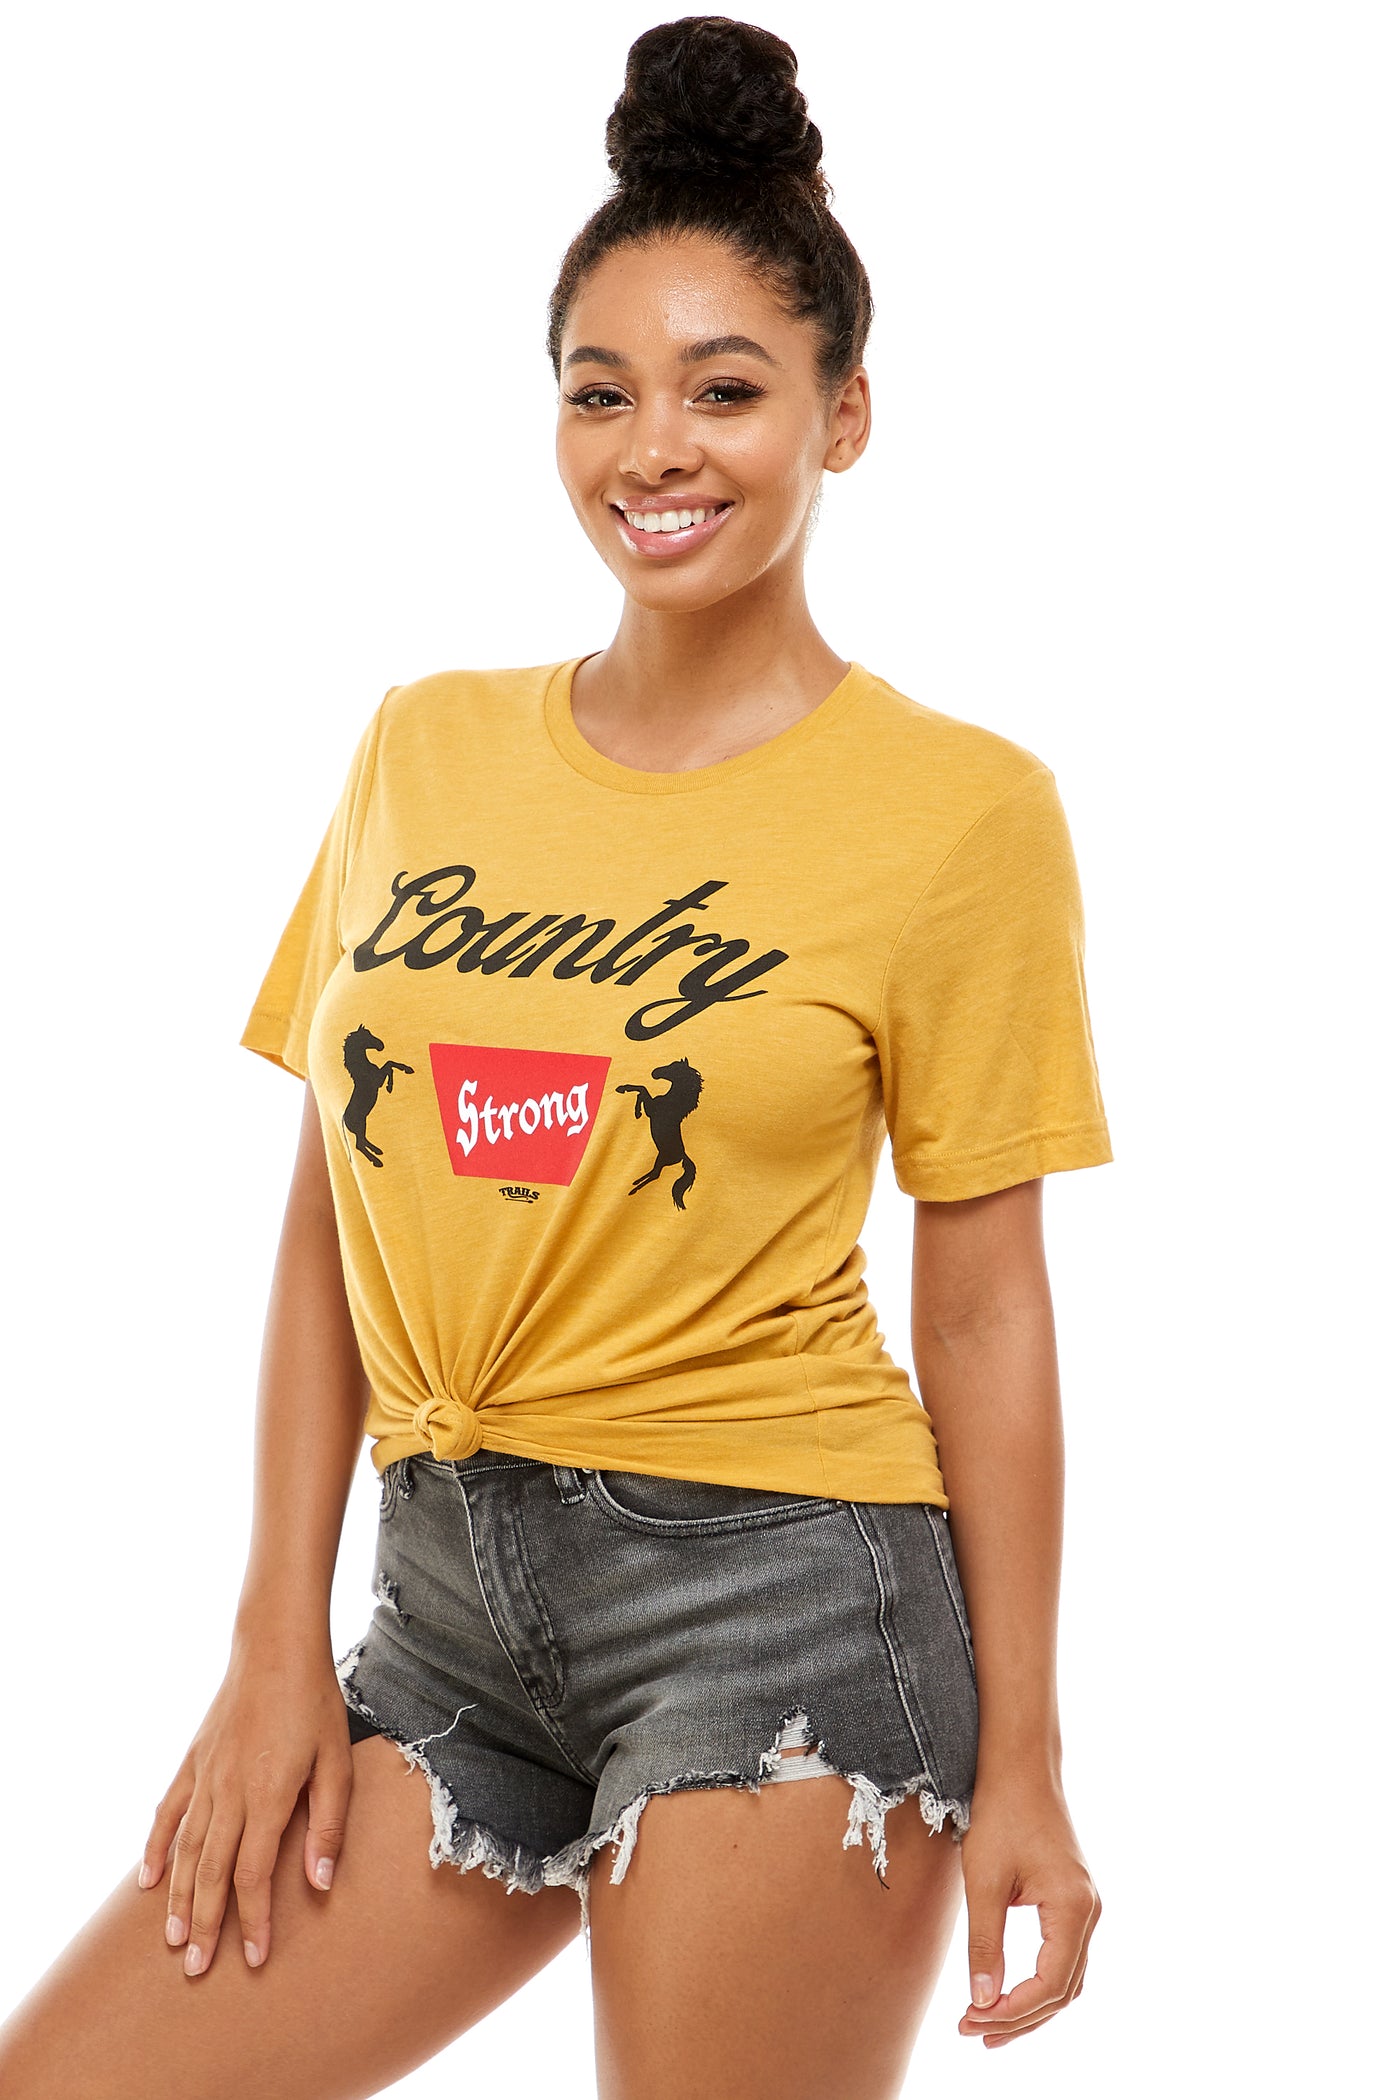 ORIGINAL BANQUET COUNTRY STRONG TEE